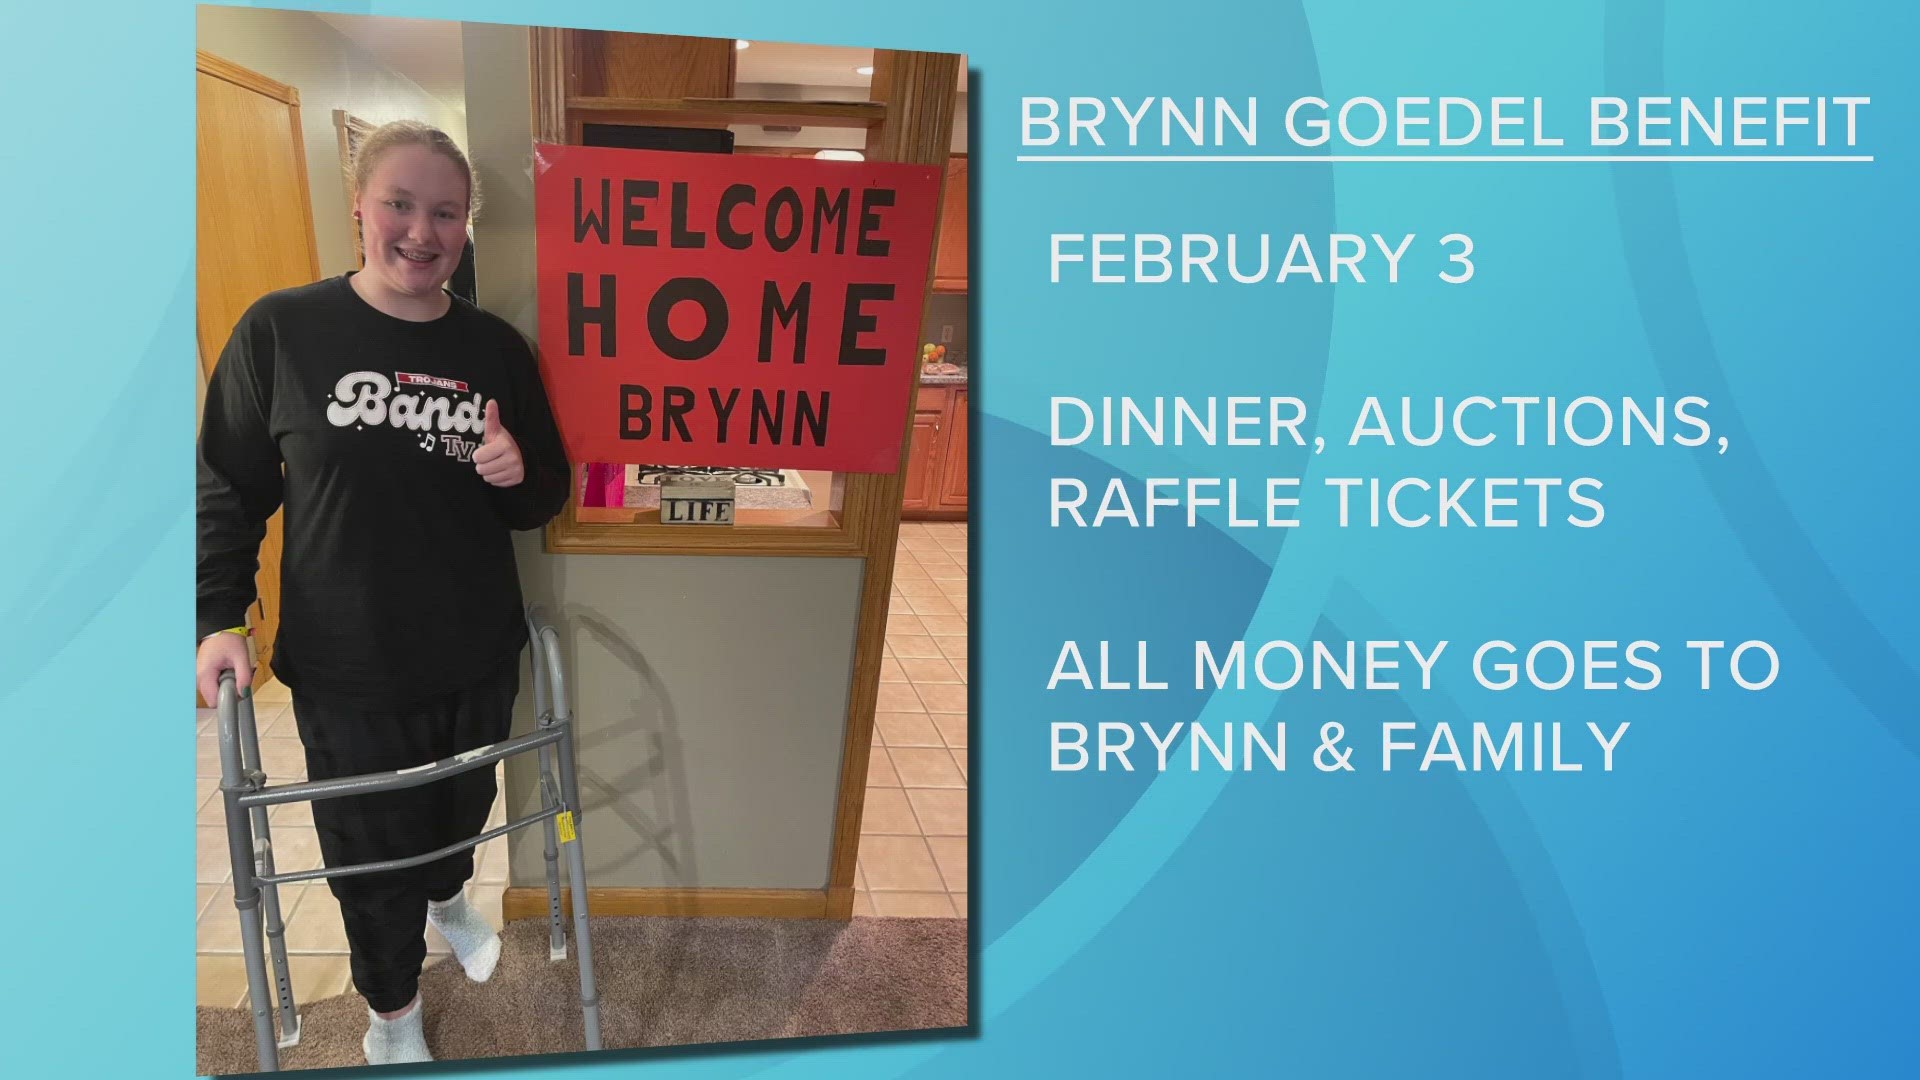 Brynn Goedel underwent multiple surgeries as a result of her injuries from the Nov. 14 crash in Licking County that killed six people.